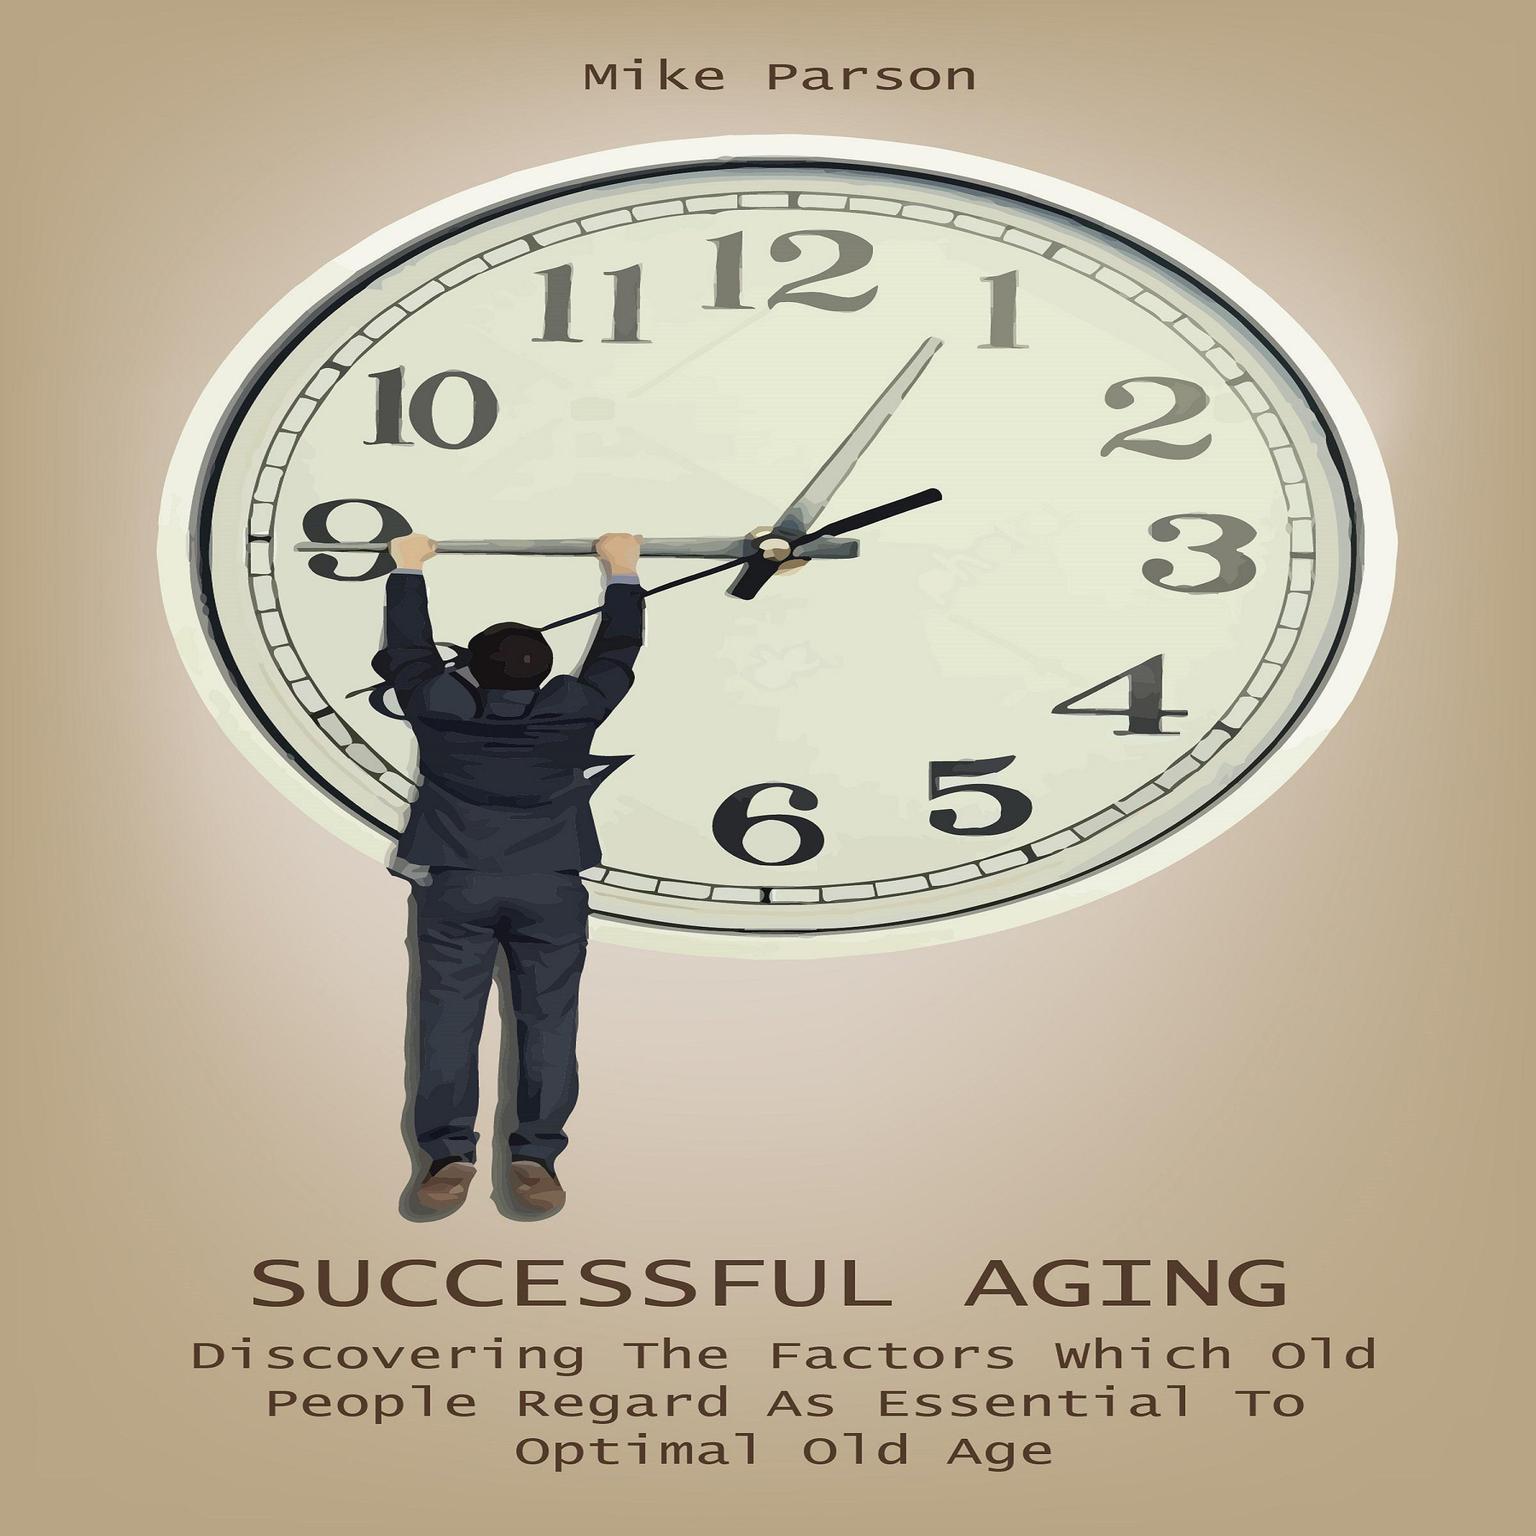 Successful Aging: Discovering The Factors Which Old People Regard As Essential To Optimal Old Age Audiobook, by Mike Parson